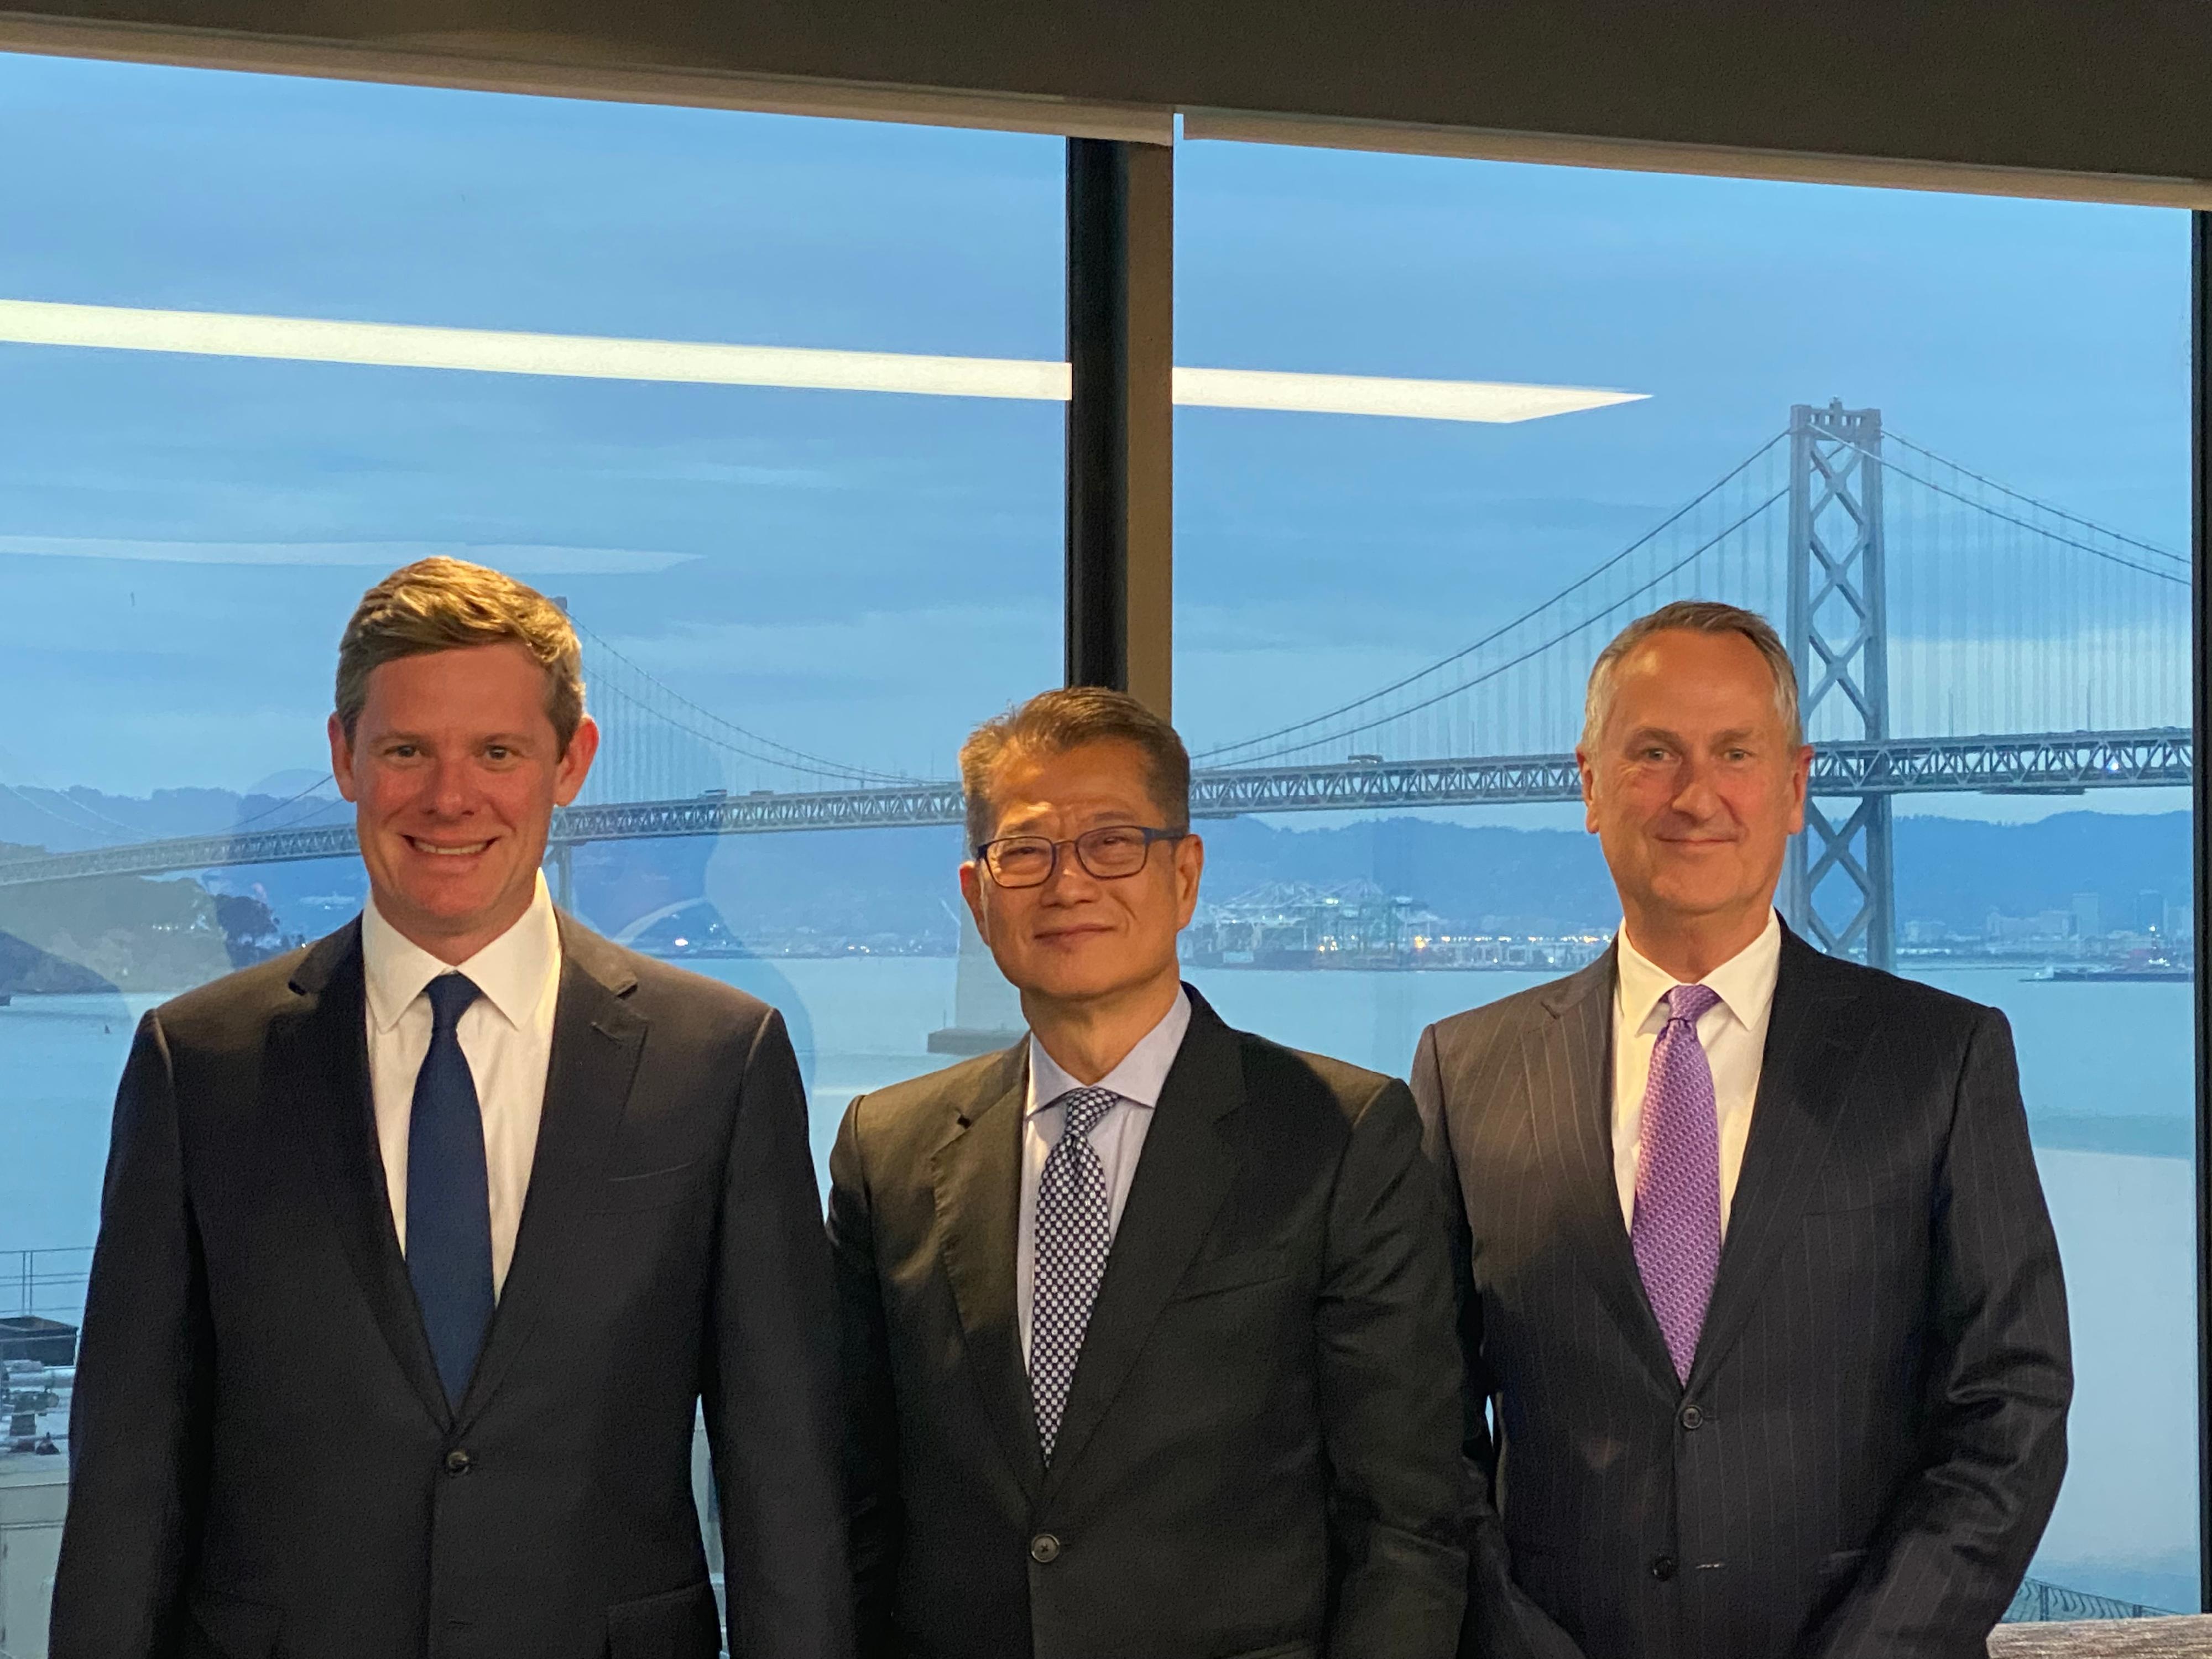 The Financial Secretary, Mr Paul Chan, visited Visa in San Francisco, the United States, yesterday (November 15, San Francisco time) and was briefed on digital payment innovations. Photo shows Mr Chan (centre) with the Chairman, Asia Pacific, Visa, Mr Chris Clark (right), and the Chief Executive Officer of Visa, Mr Ryan McInerney (left).